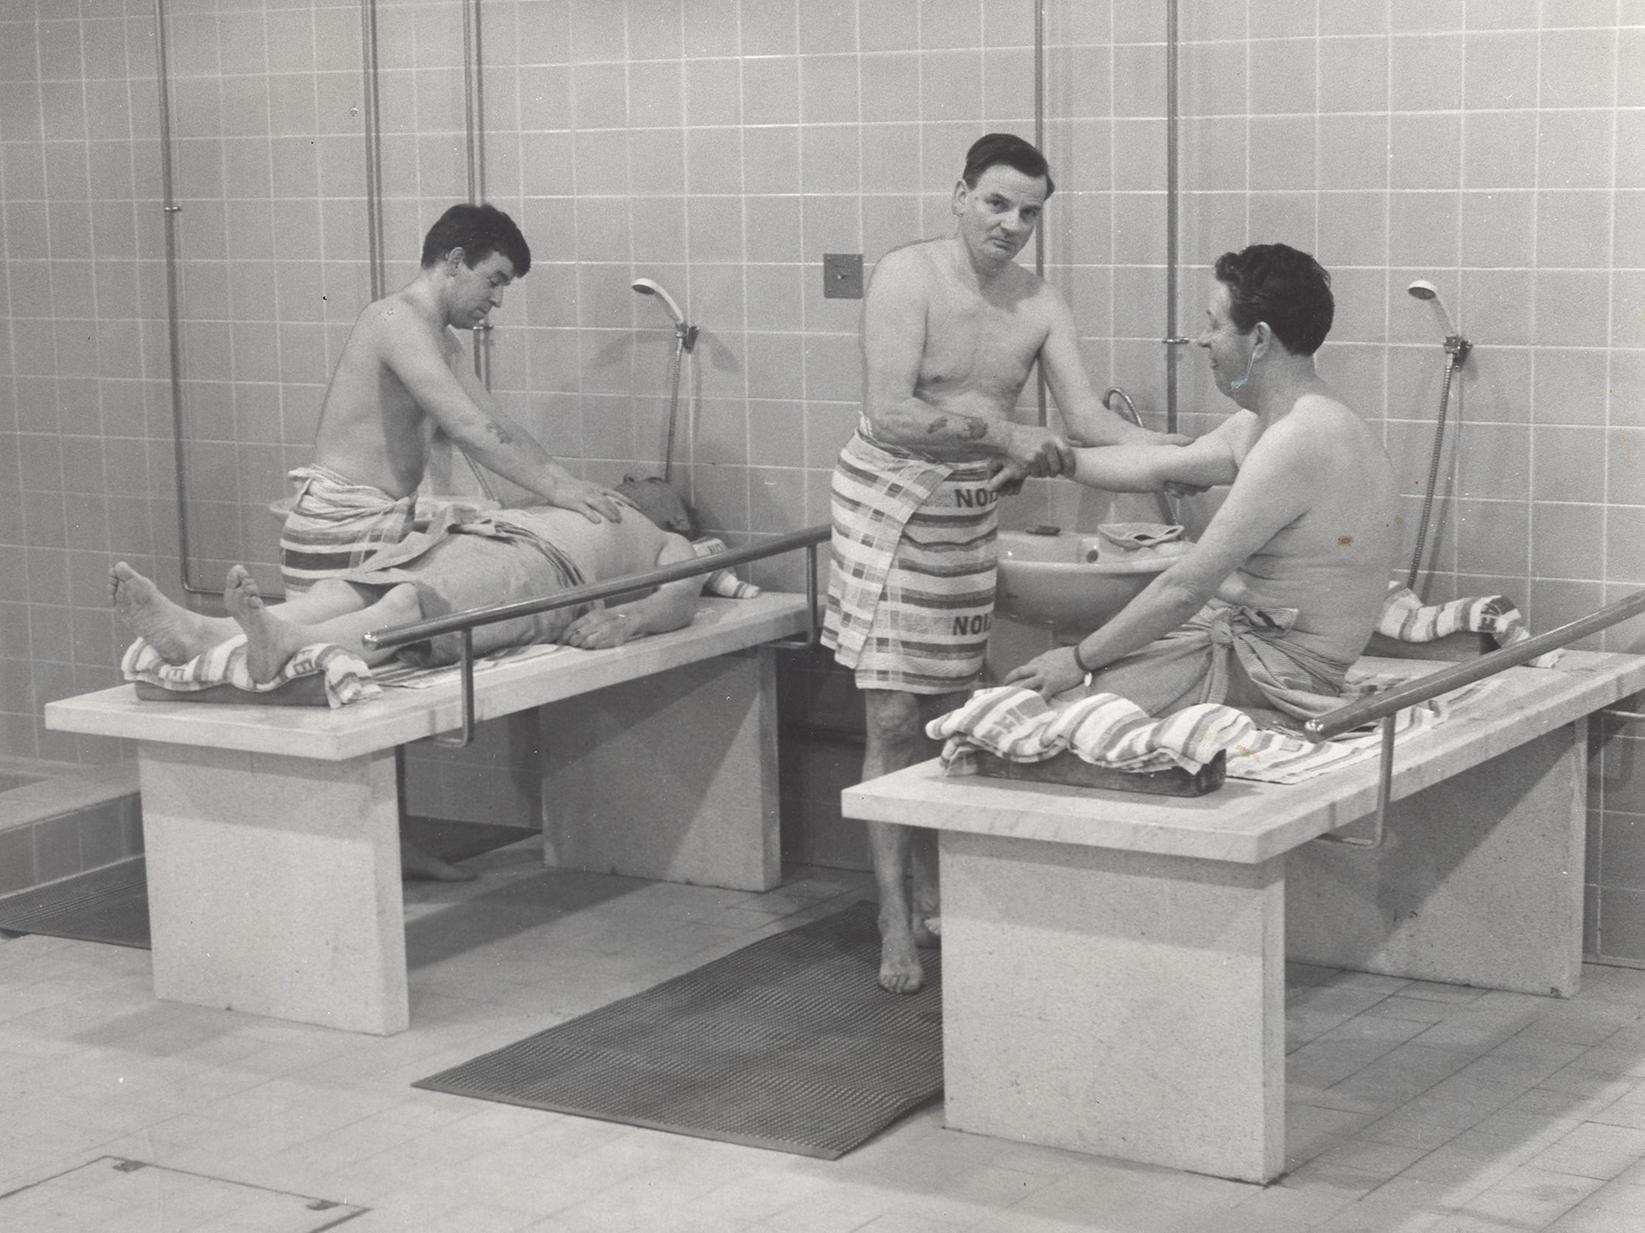 The Turkish and remedial baths were open to the public for the first time. Pictured are the first customers enjoying the new facilities.